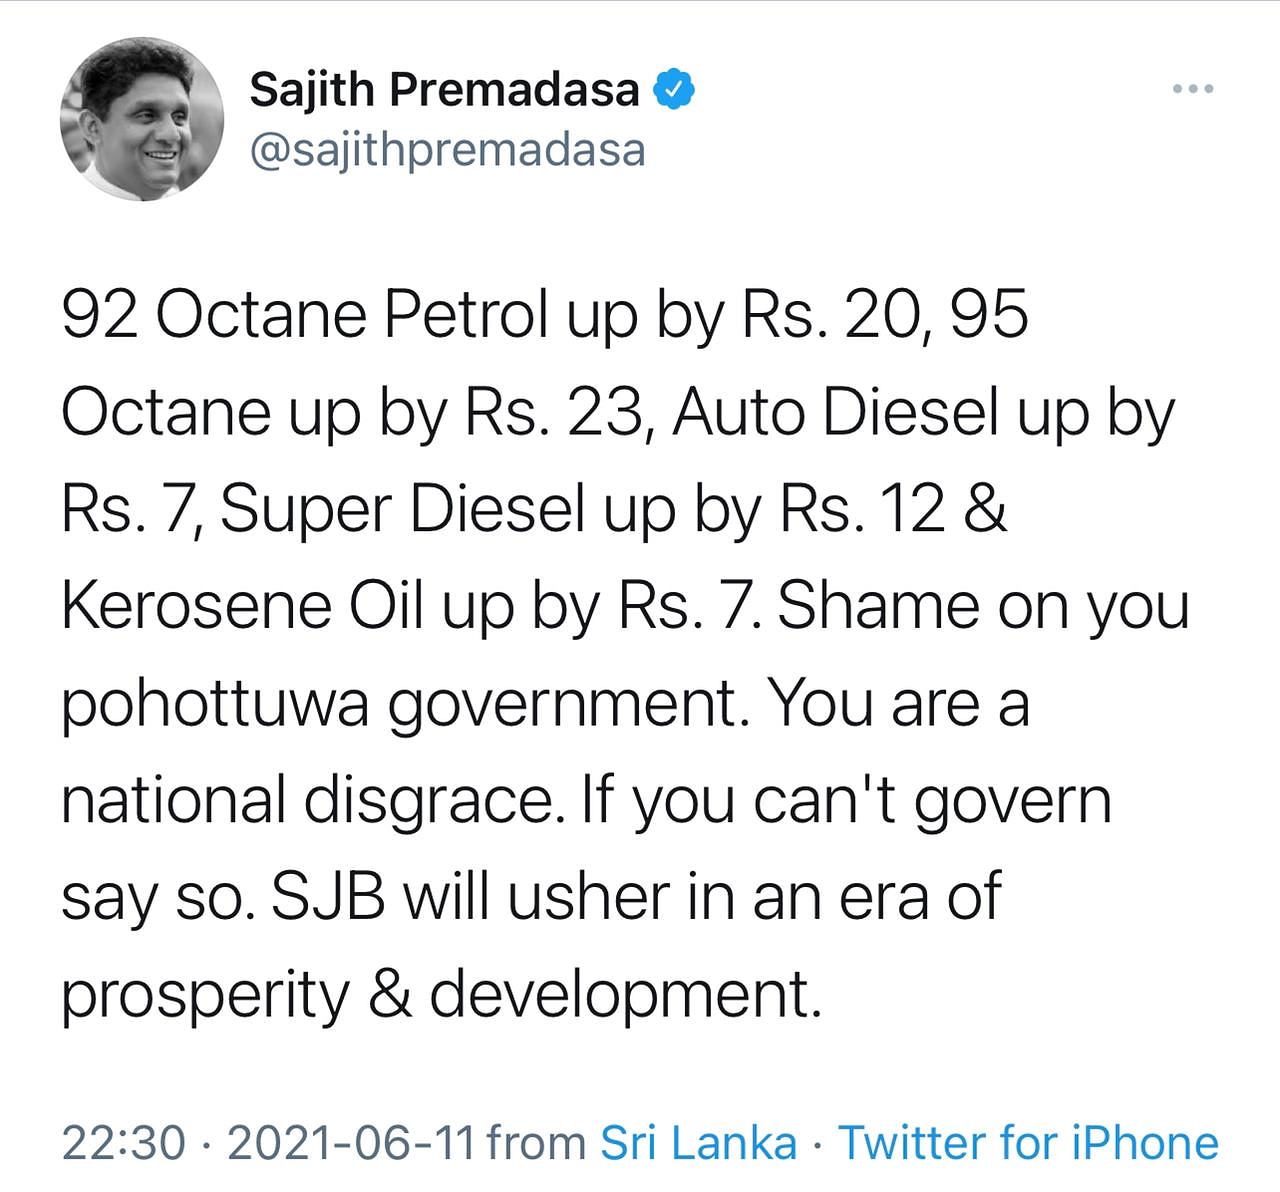 Opposition leader comments on government’s decision to increase fuel prices